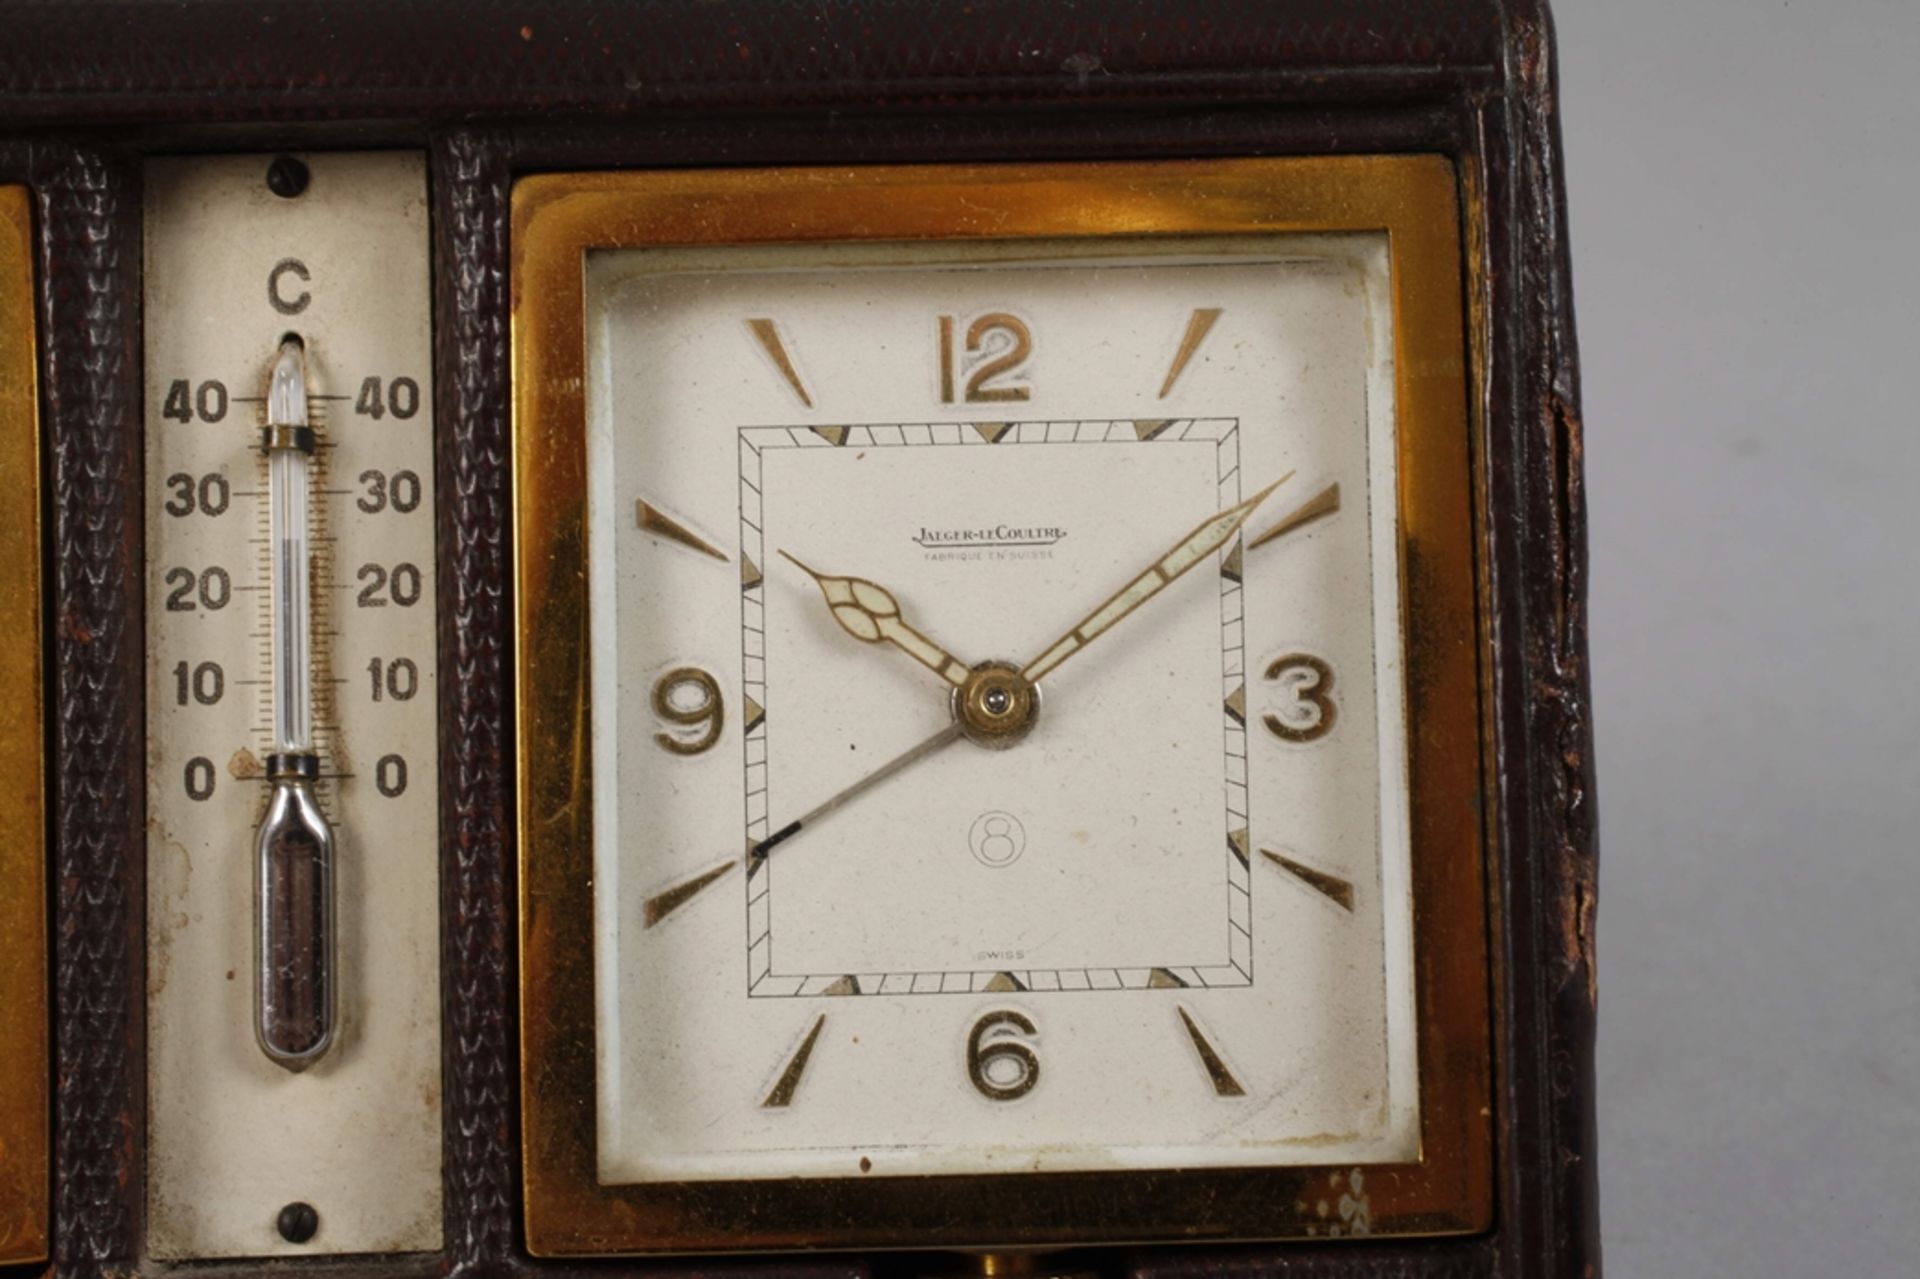 Jaeger LeCoultre Weather Station Compendium - Image 3 of 5